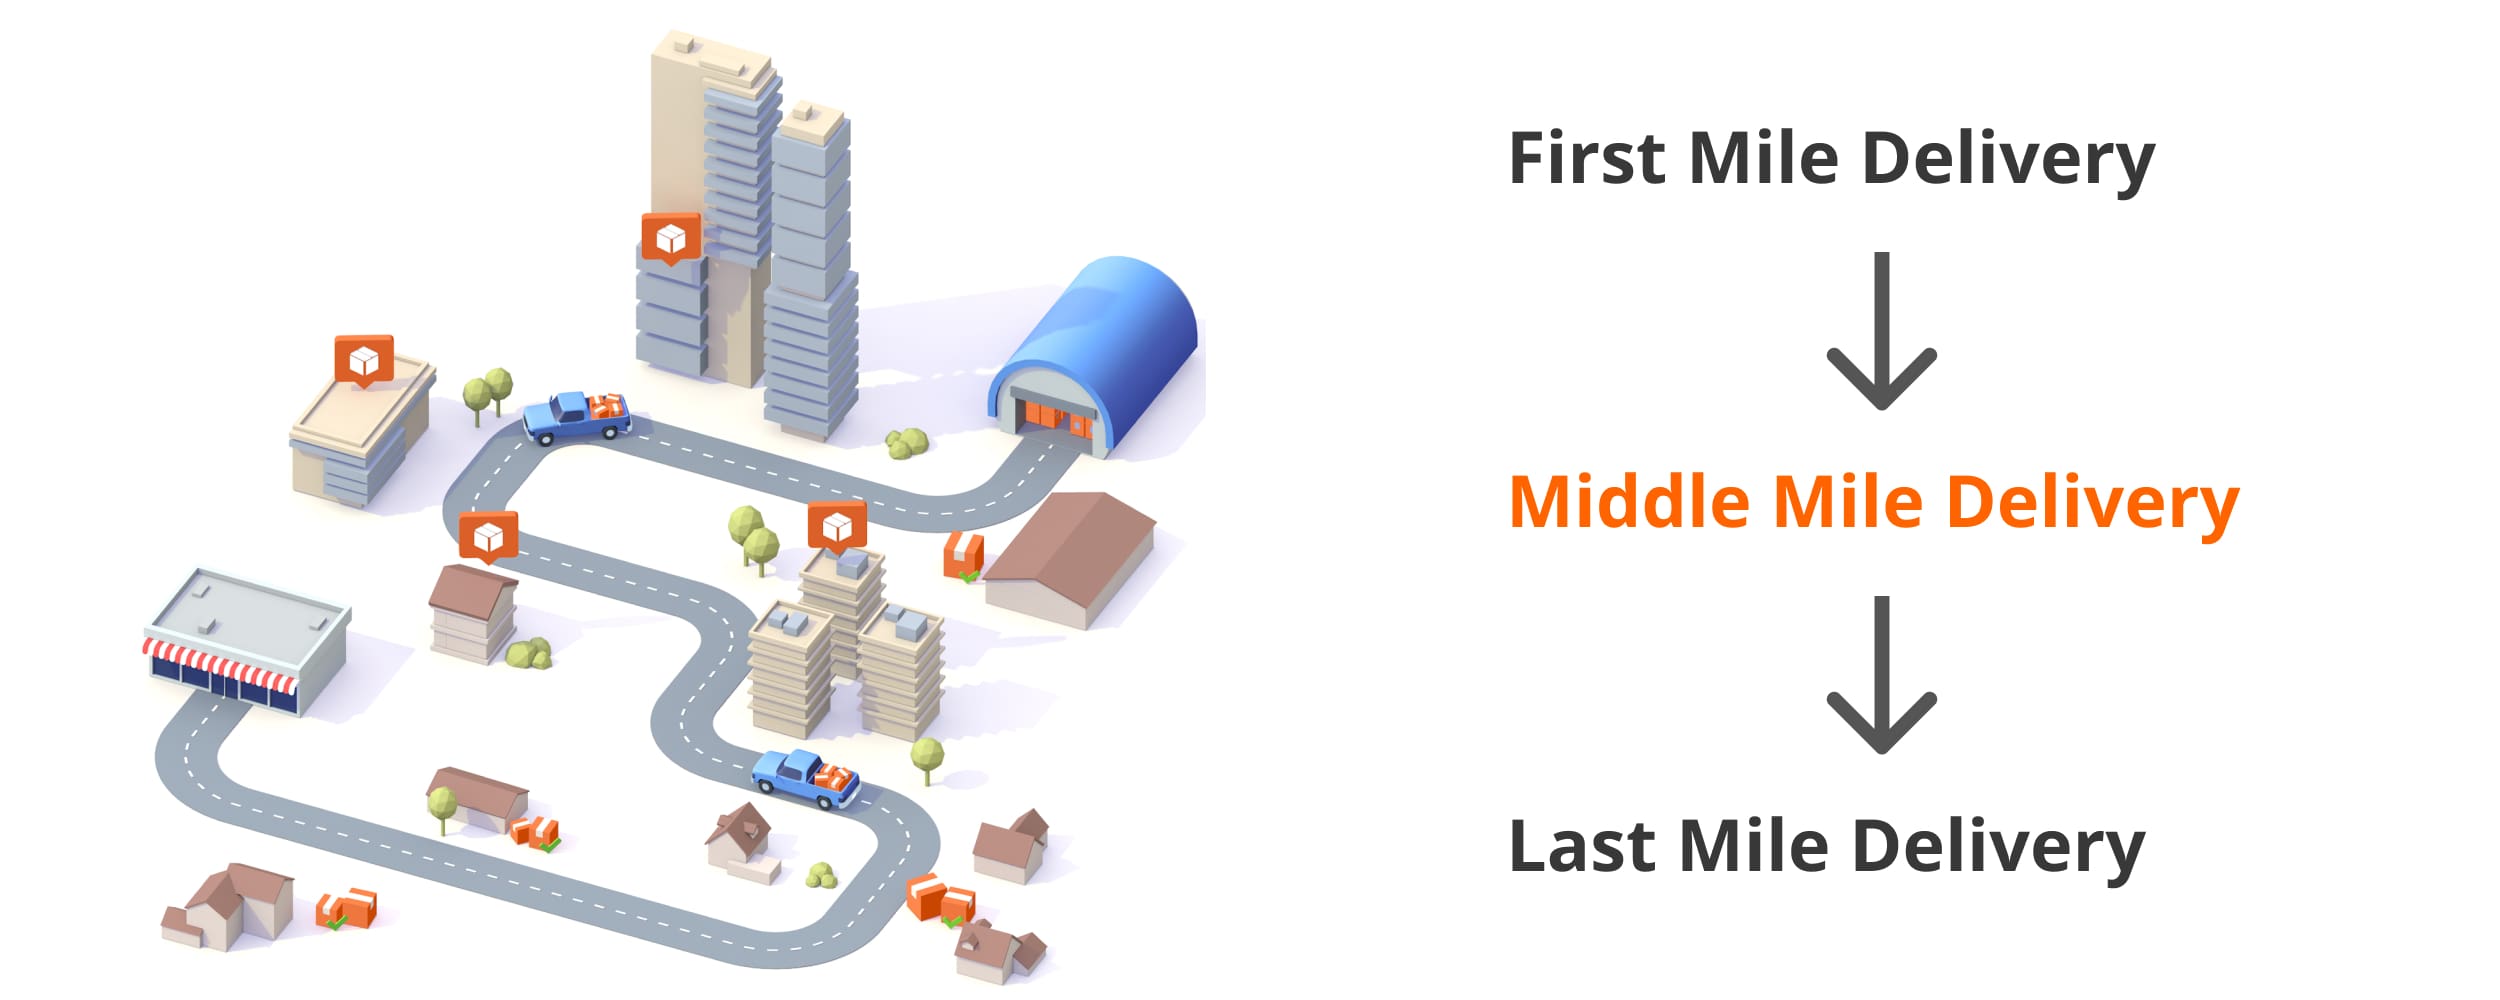 The sequence of the first mile, middle mile, and last mile within the supply chain.